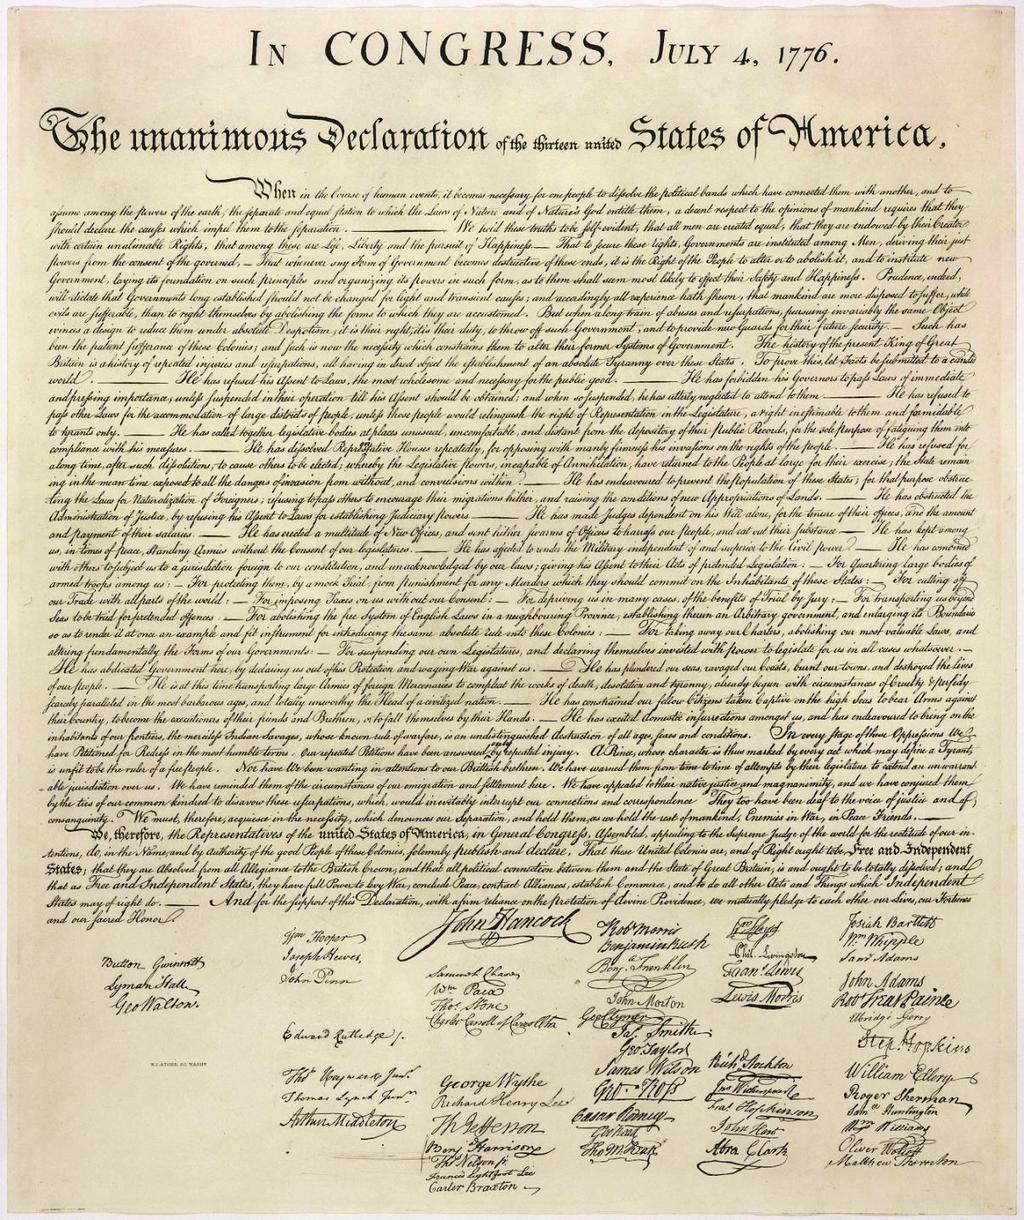 Politics of Independence On July 4, 1776 at the Continental Congress Thomas Jefferson wrote the Declaration of Independence in